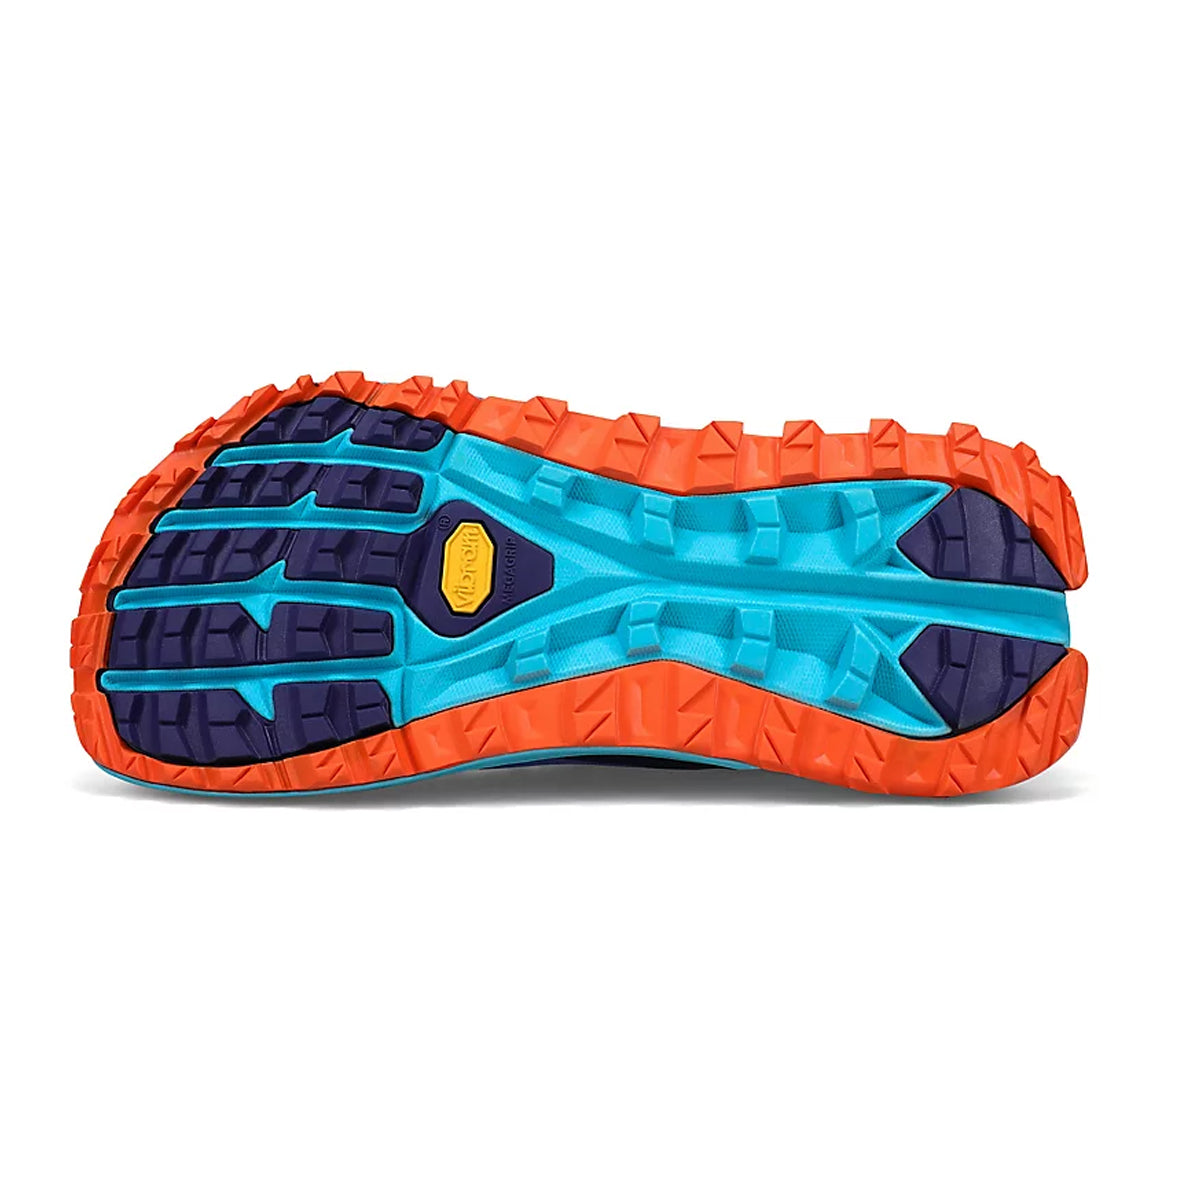 Altra Olympus 5 in Blue by GOHUNT | Altra - GOHUNT Shop